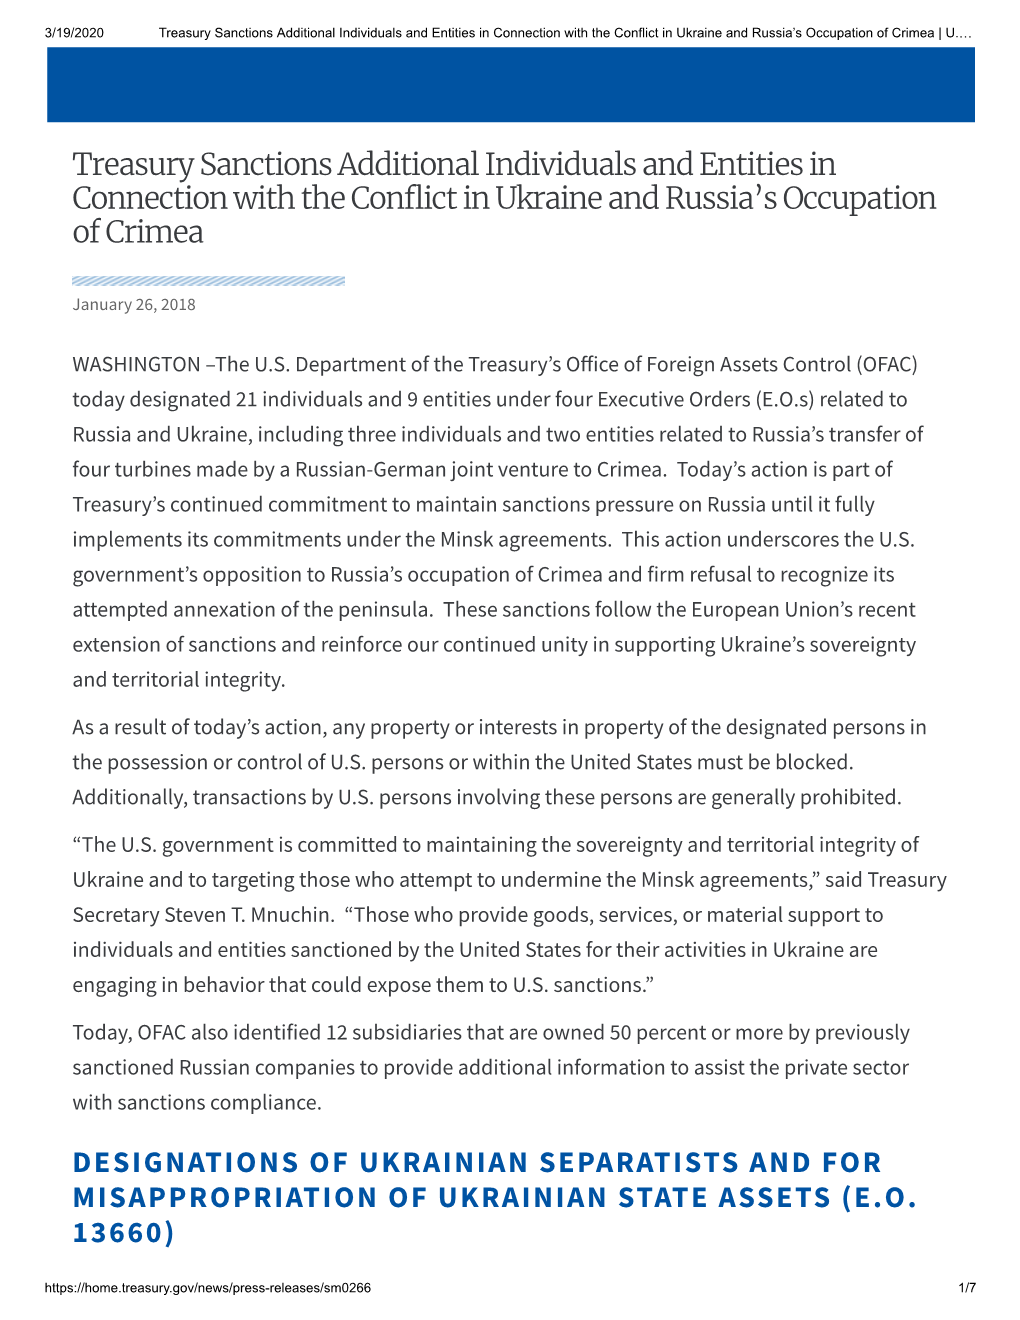 Treasury Sanctions Additional Individuals and Entities in Connection with the Conflict in Ukraine and Russia's Occupation of C